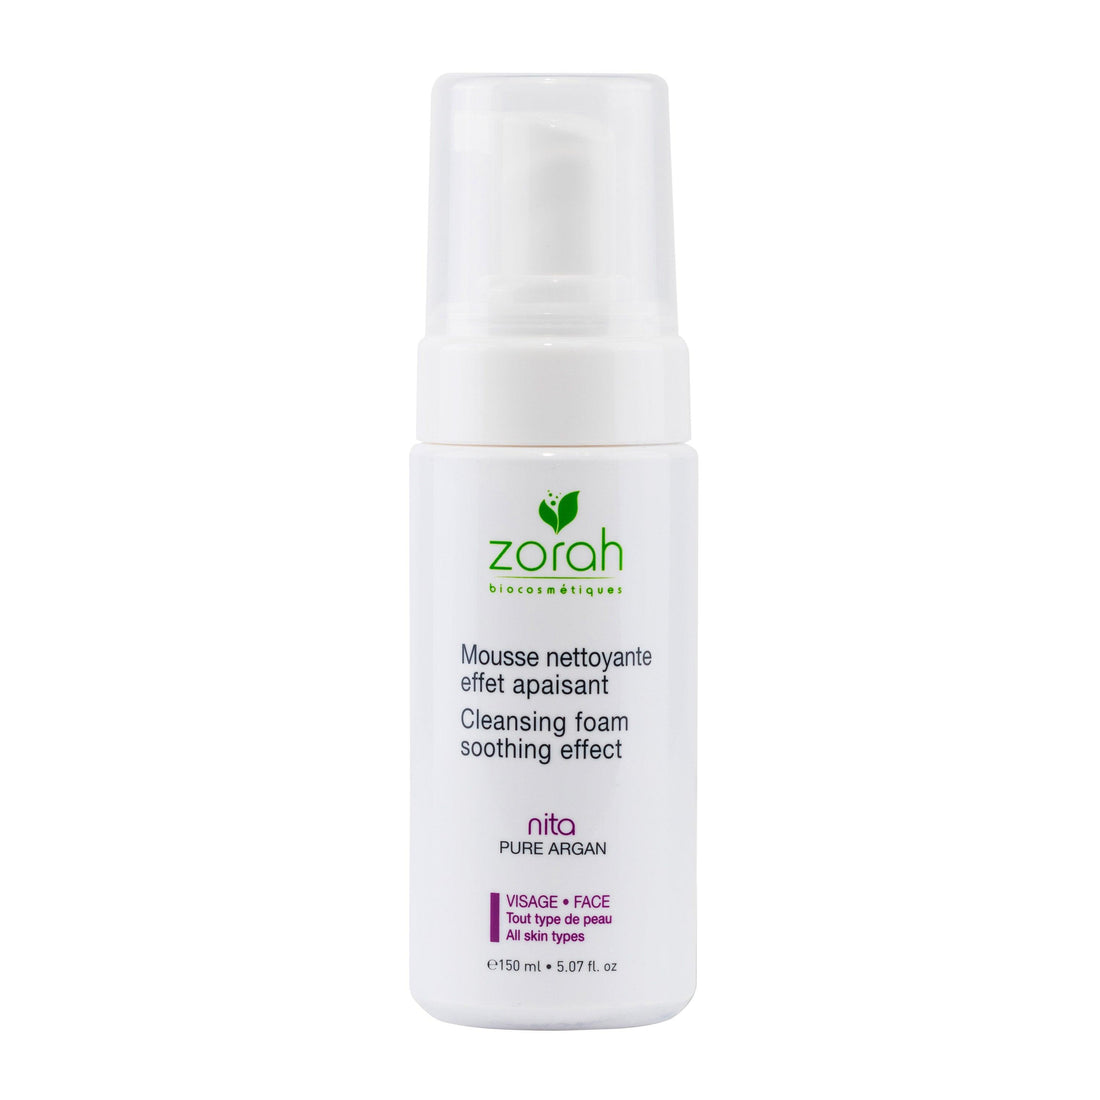 nita | soothing eye and face cleansing foam - Zorah biocosmétiques